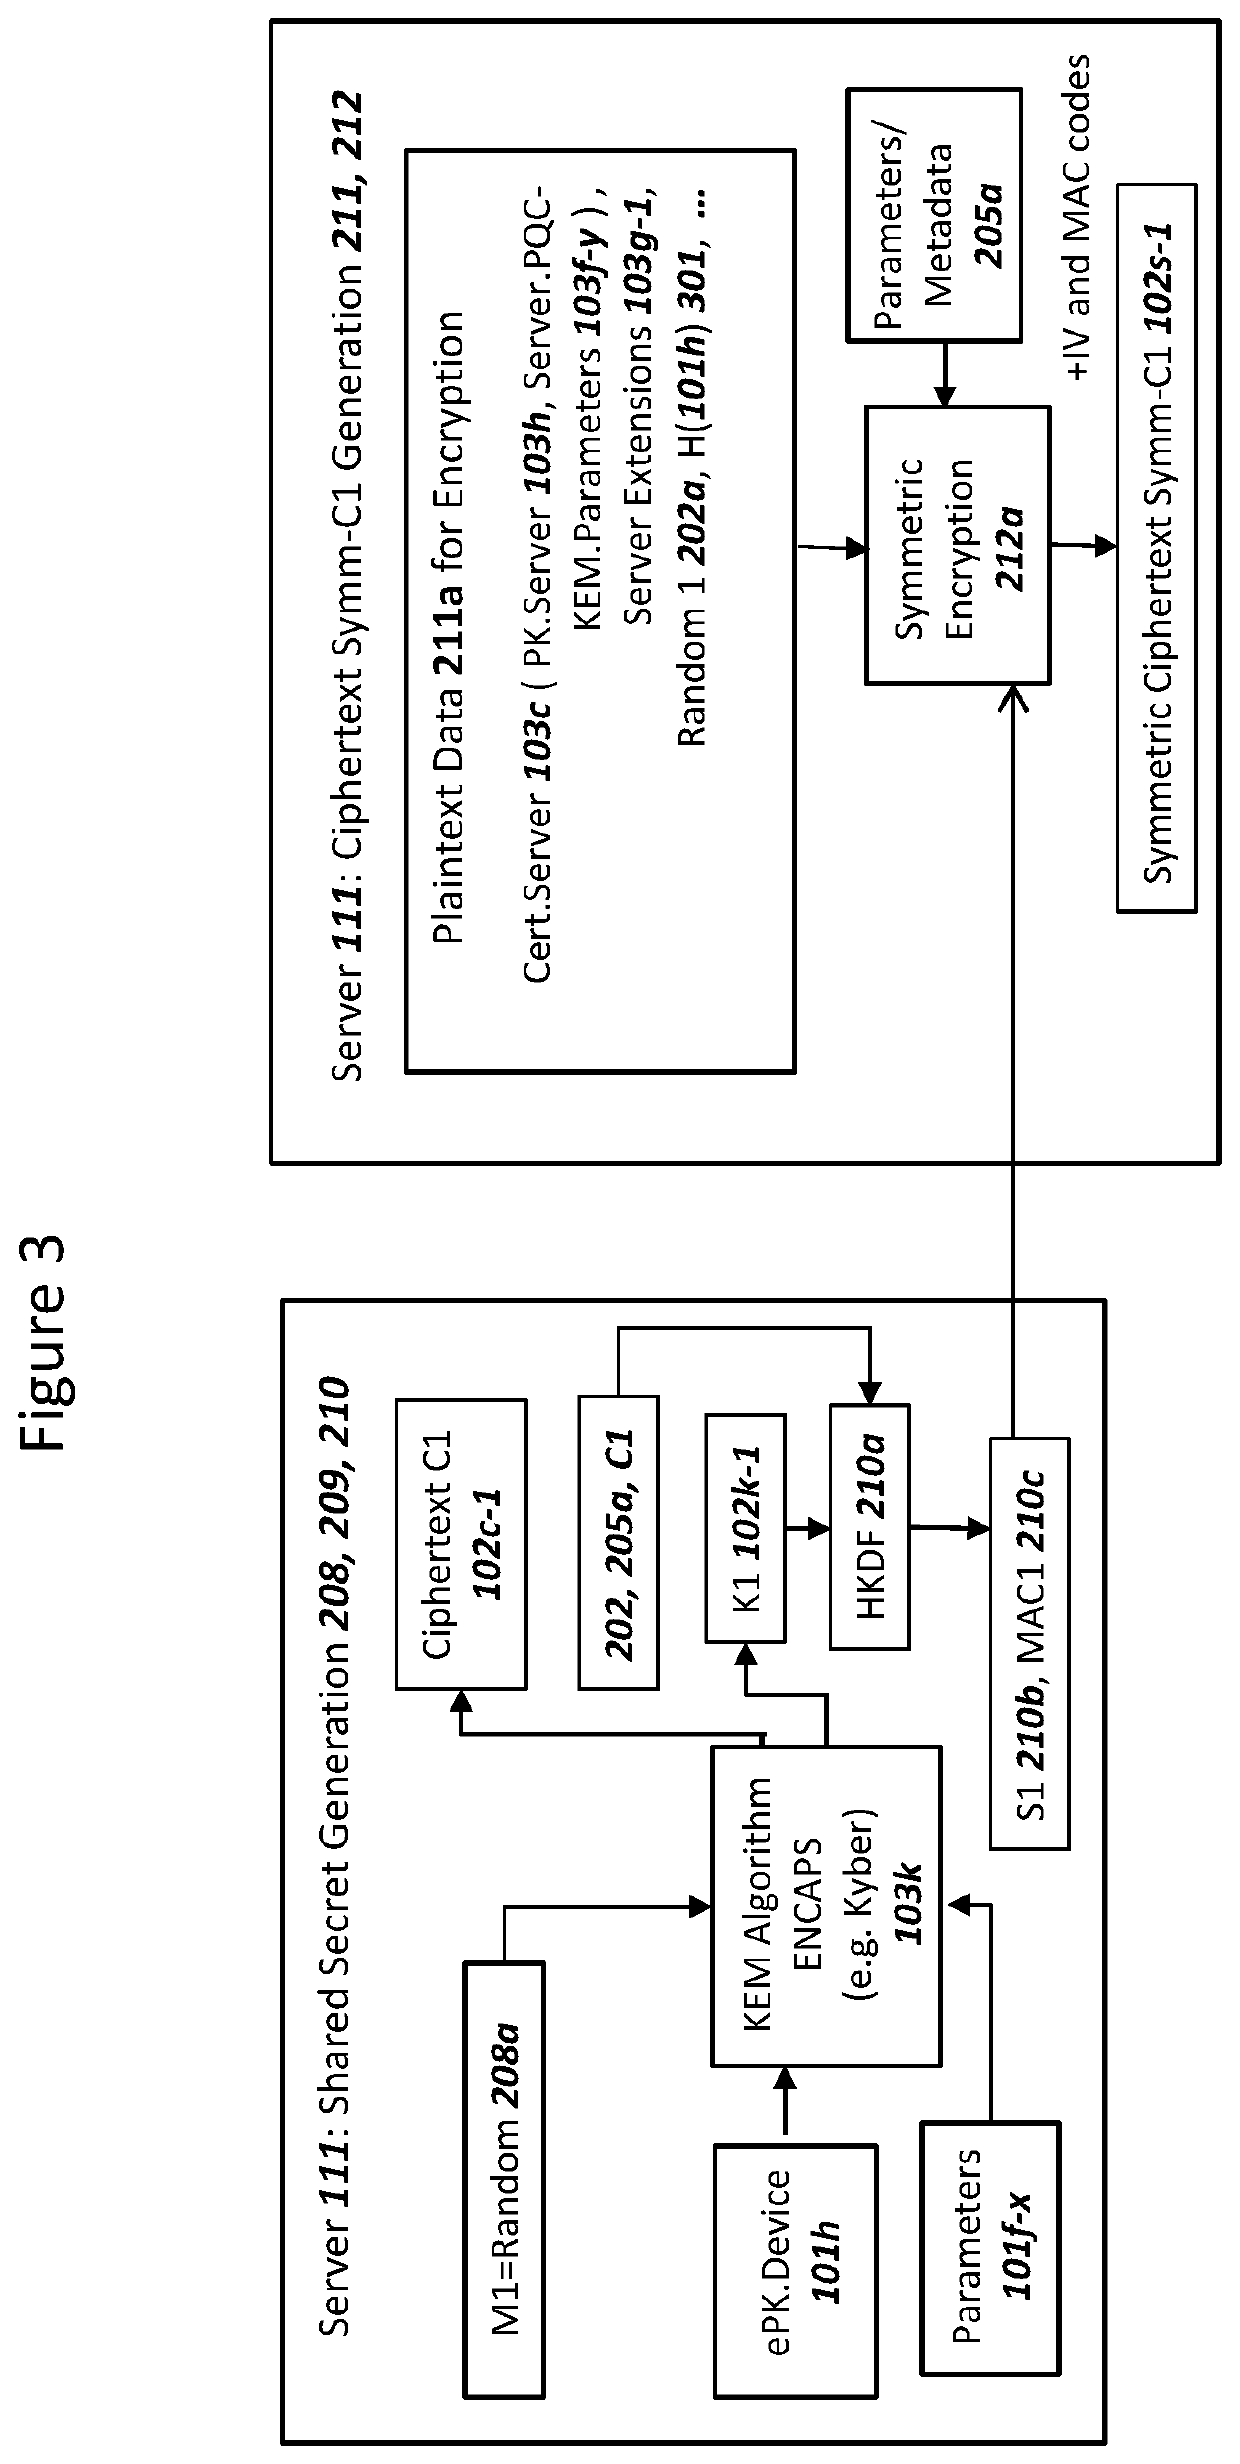 Network securing device data using two post-quantum cryptography key encapsulation mechanisms